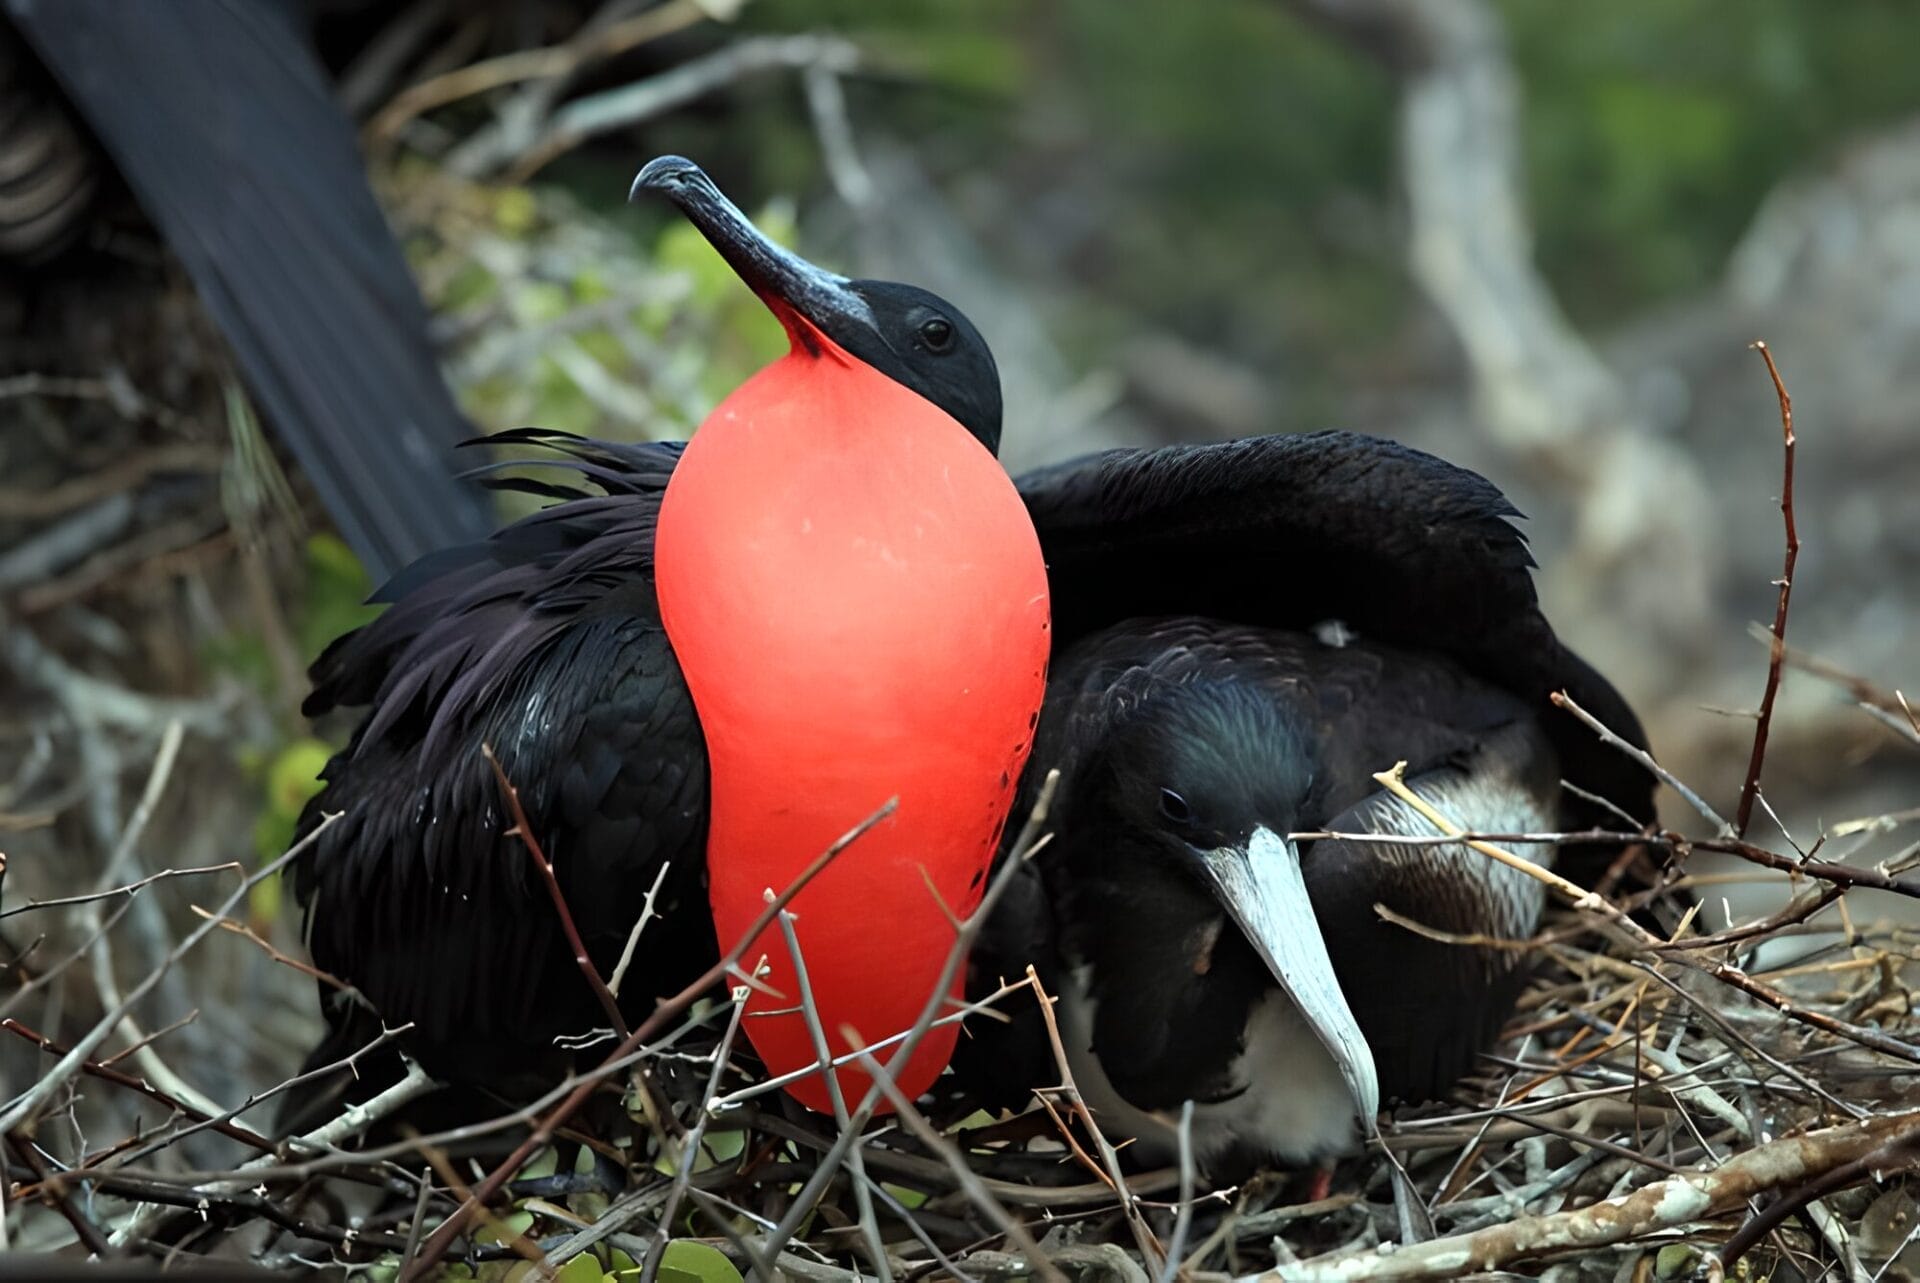 A male frigatebird with an inflated bright red throat pouch sitting in a nest next to a smaller black and white bird, surrounded by twigs and branches in Sian Ka'an, Mexico.